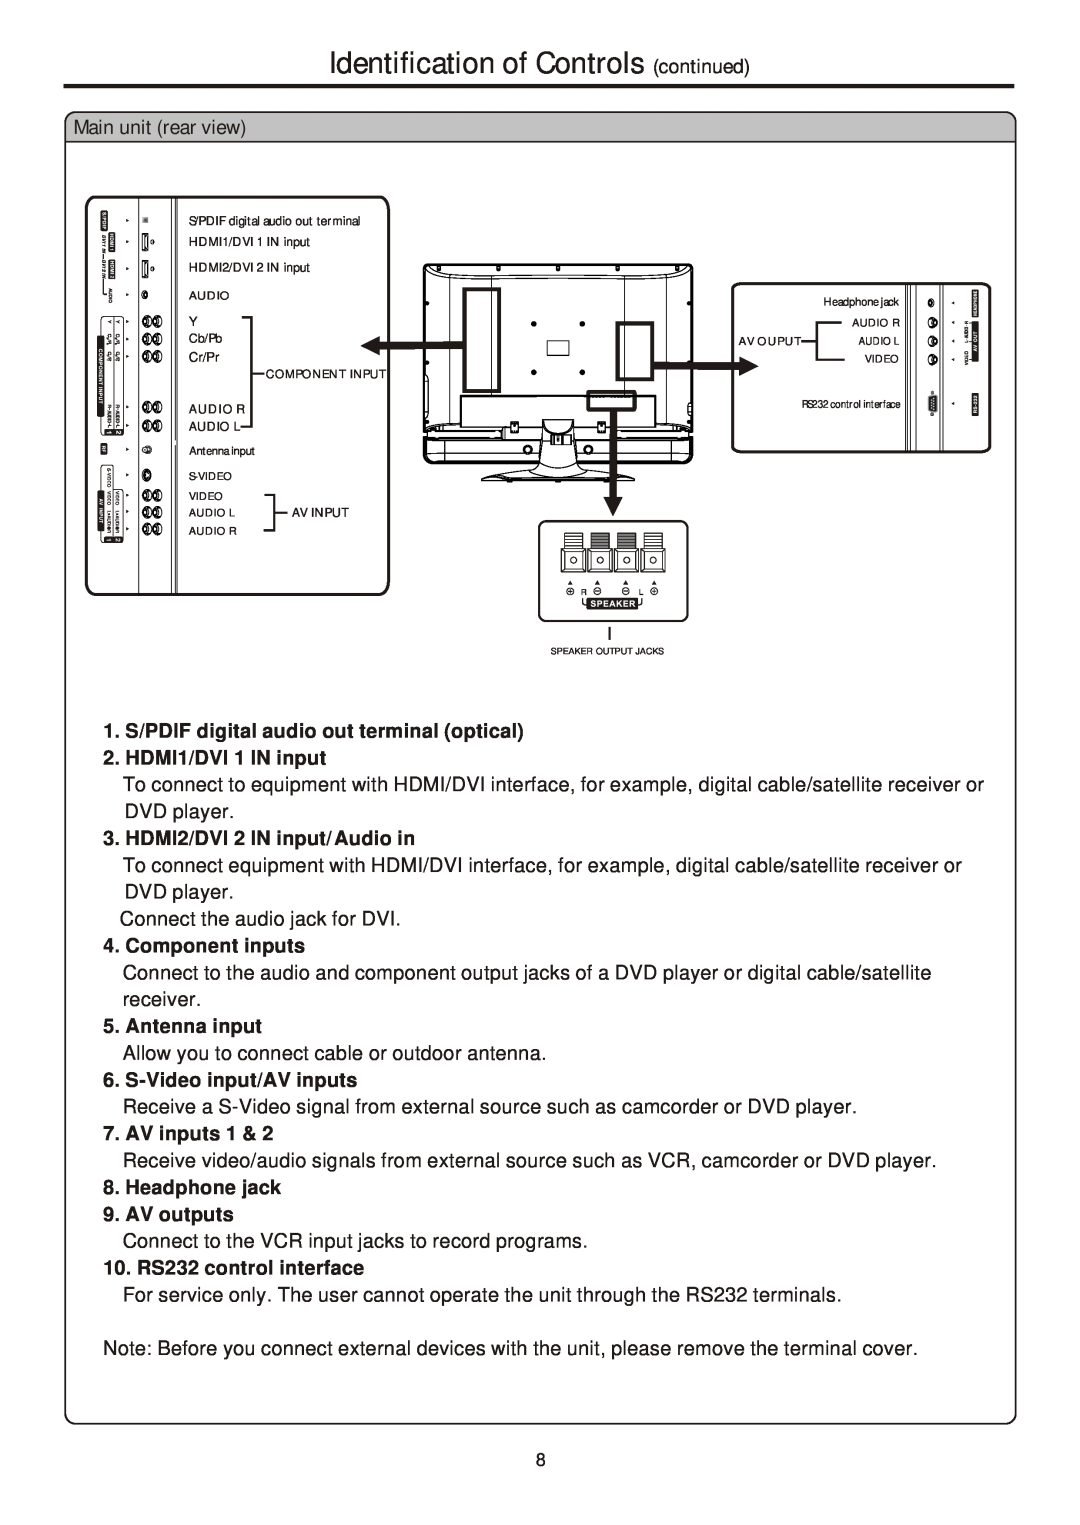 Sanyo 323, 263 Identification of Controls continued, Main unit rear view, HDMI2/DVI 2 IN input/Audio in, Component inputs 